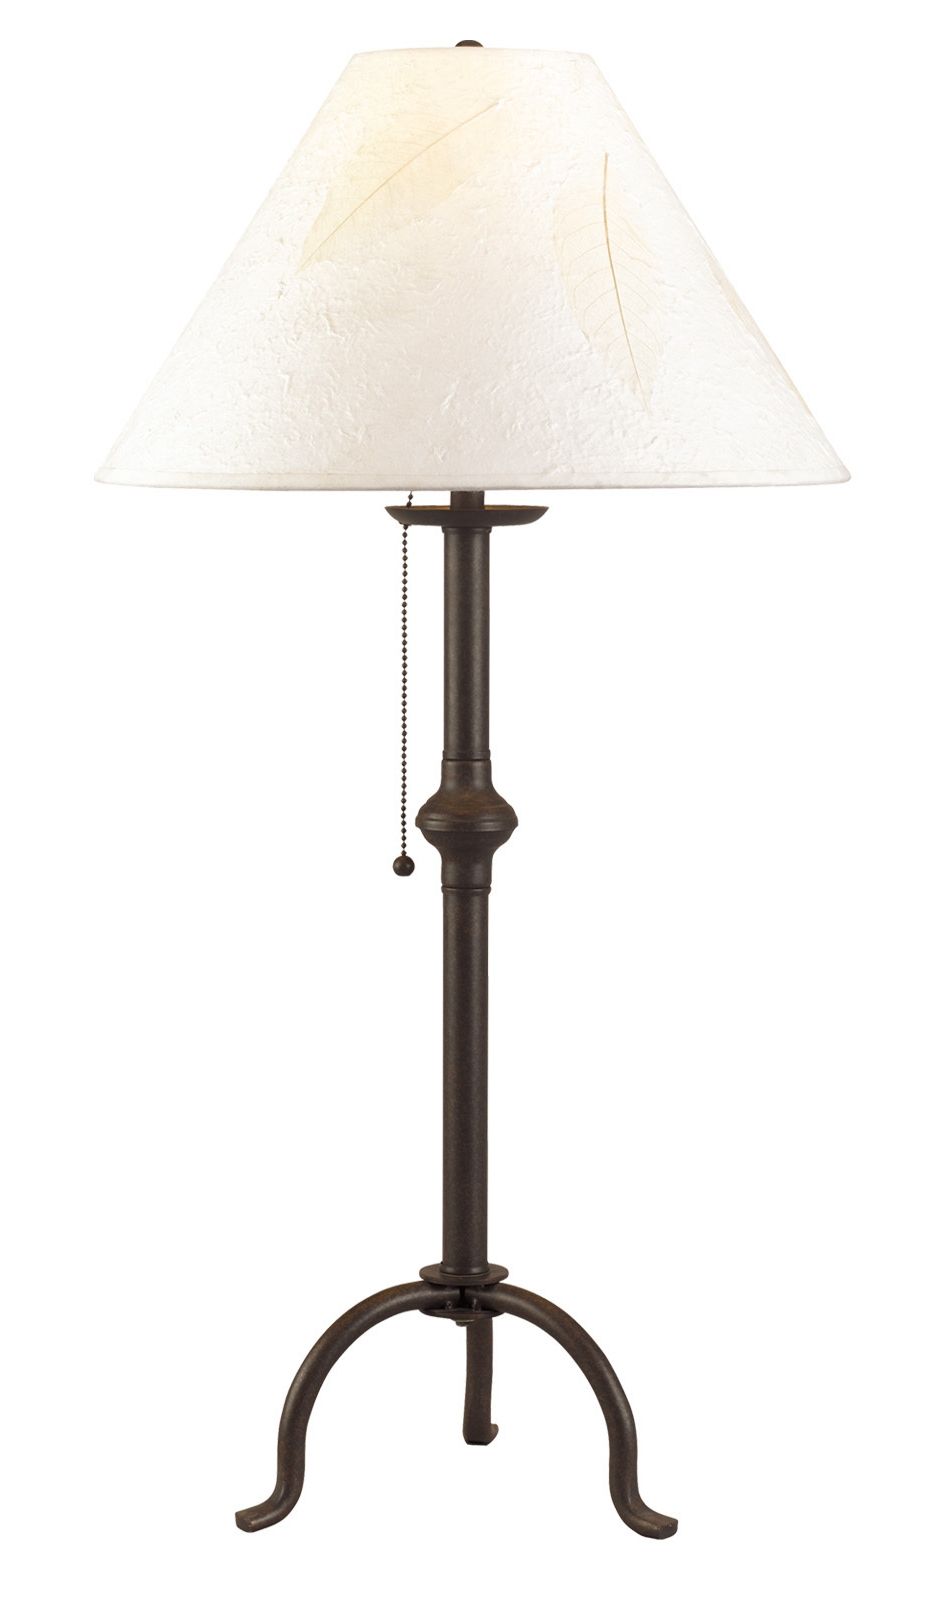 75w Iron Table Lamp W/pull Chain : 405wqkt (View 14 of 15)